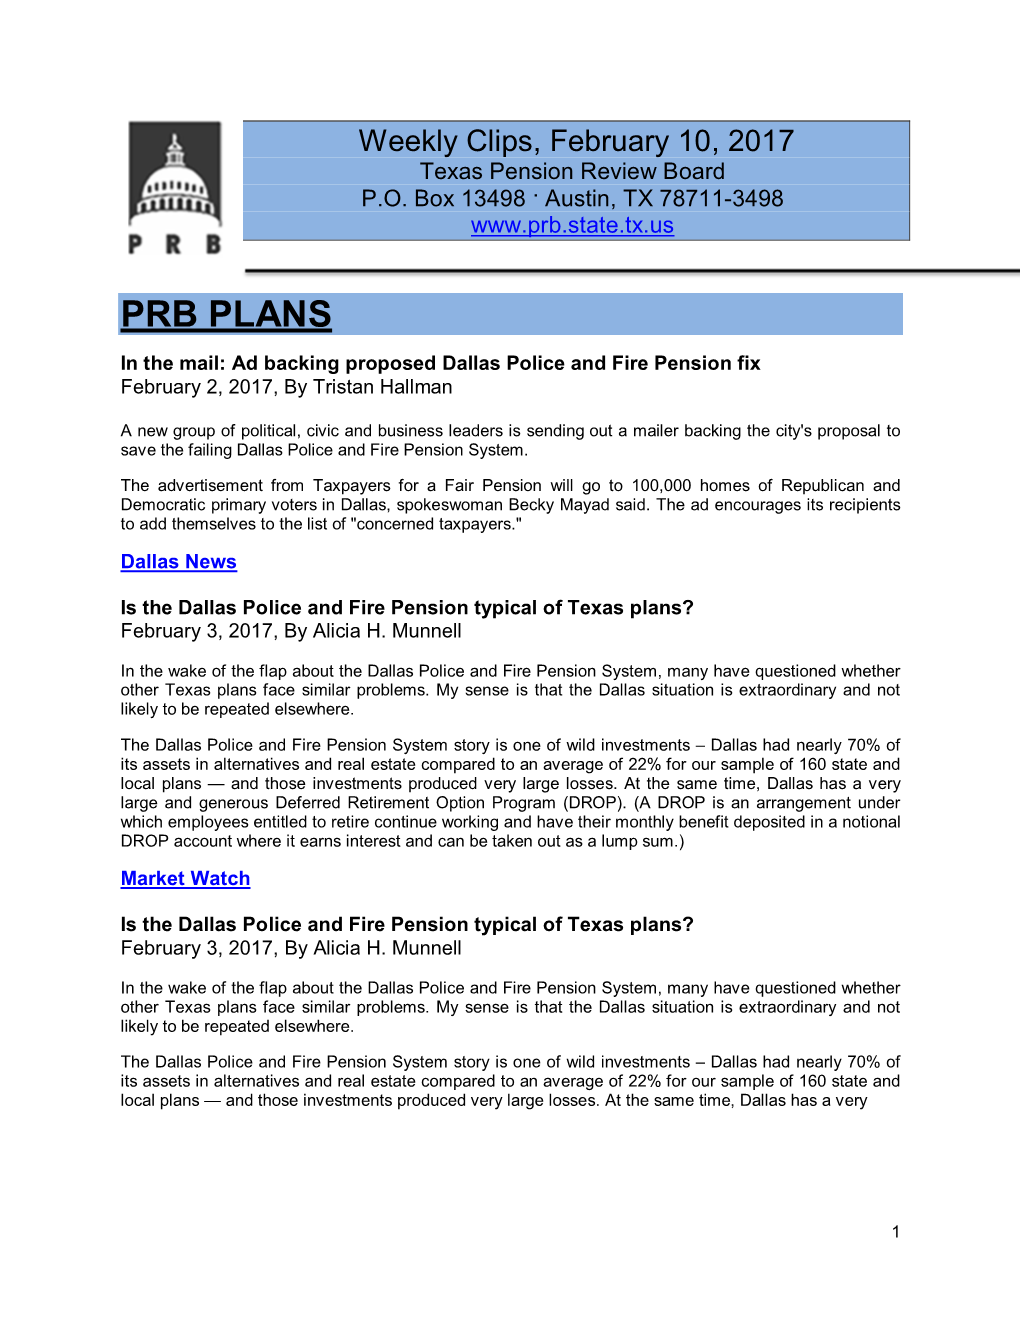 PRB PLANS in the Mail: Ad Backing Proposed Dallas Police and Fire Pension Fix February 2, 2017, by Tristan Hallman